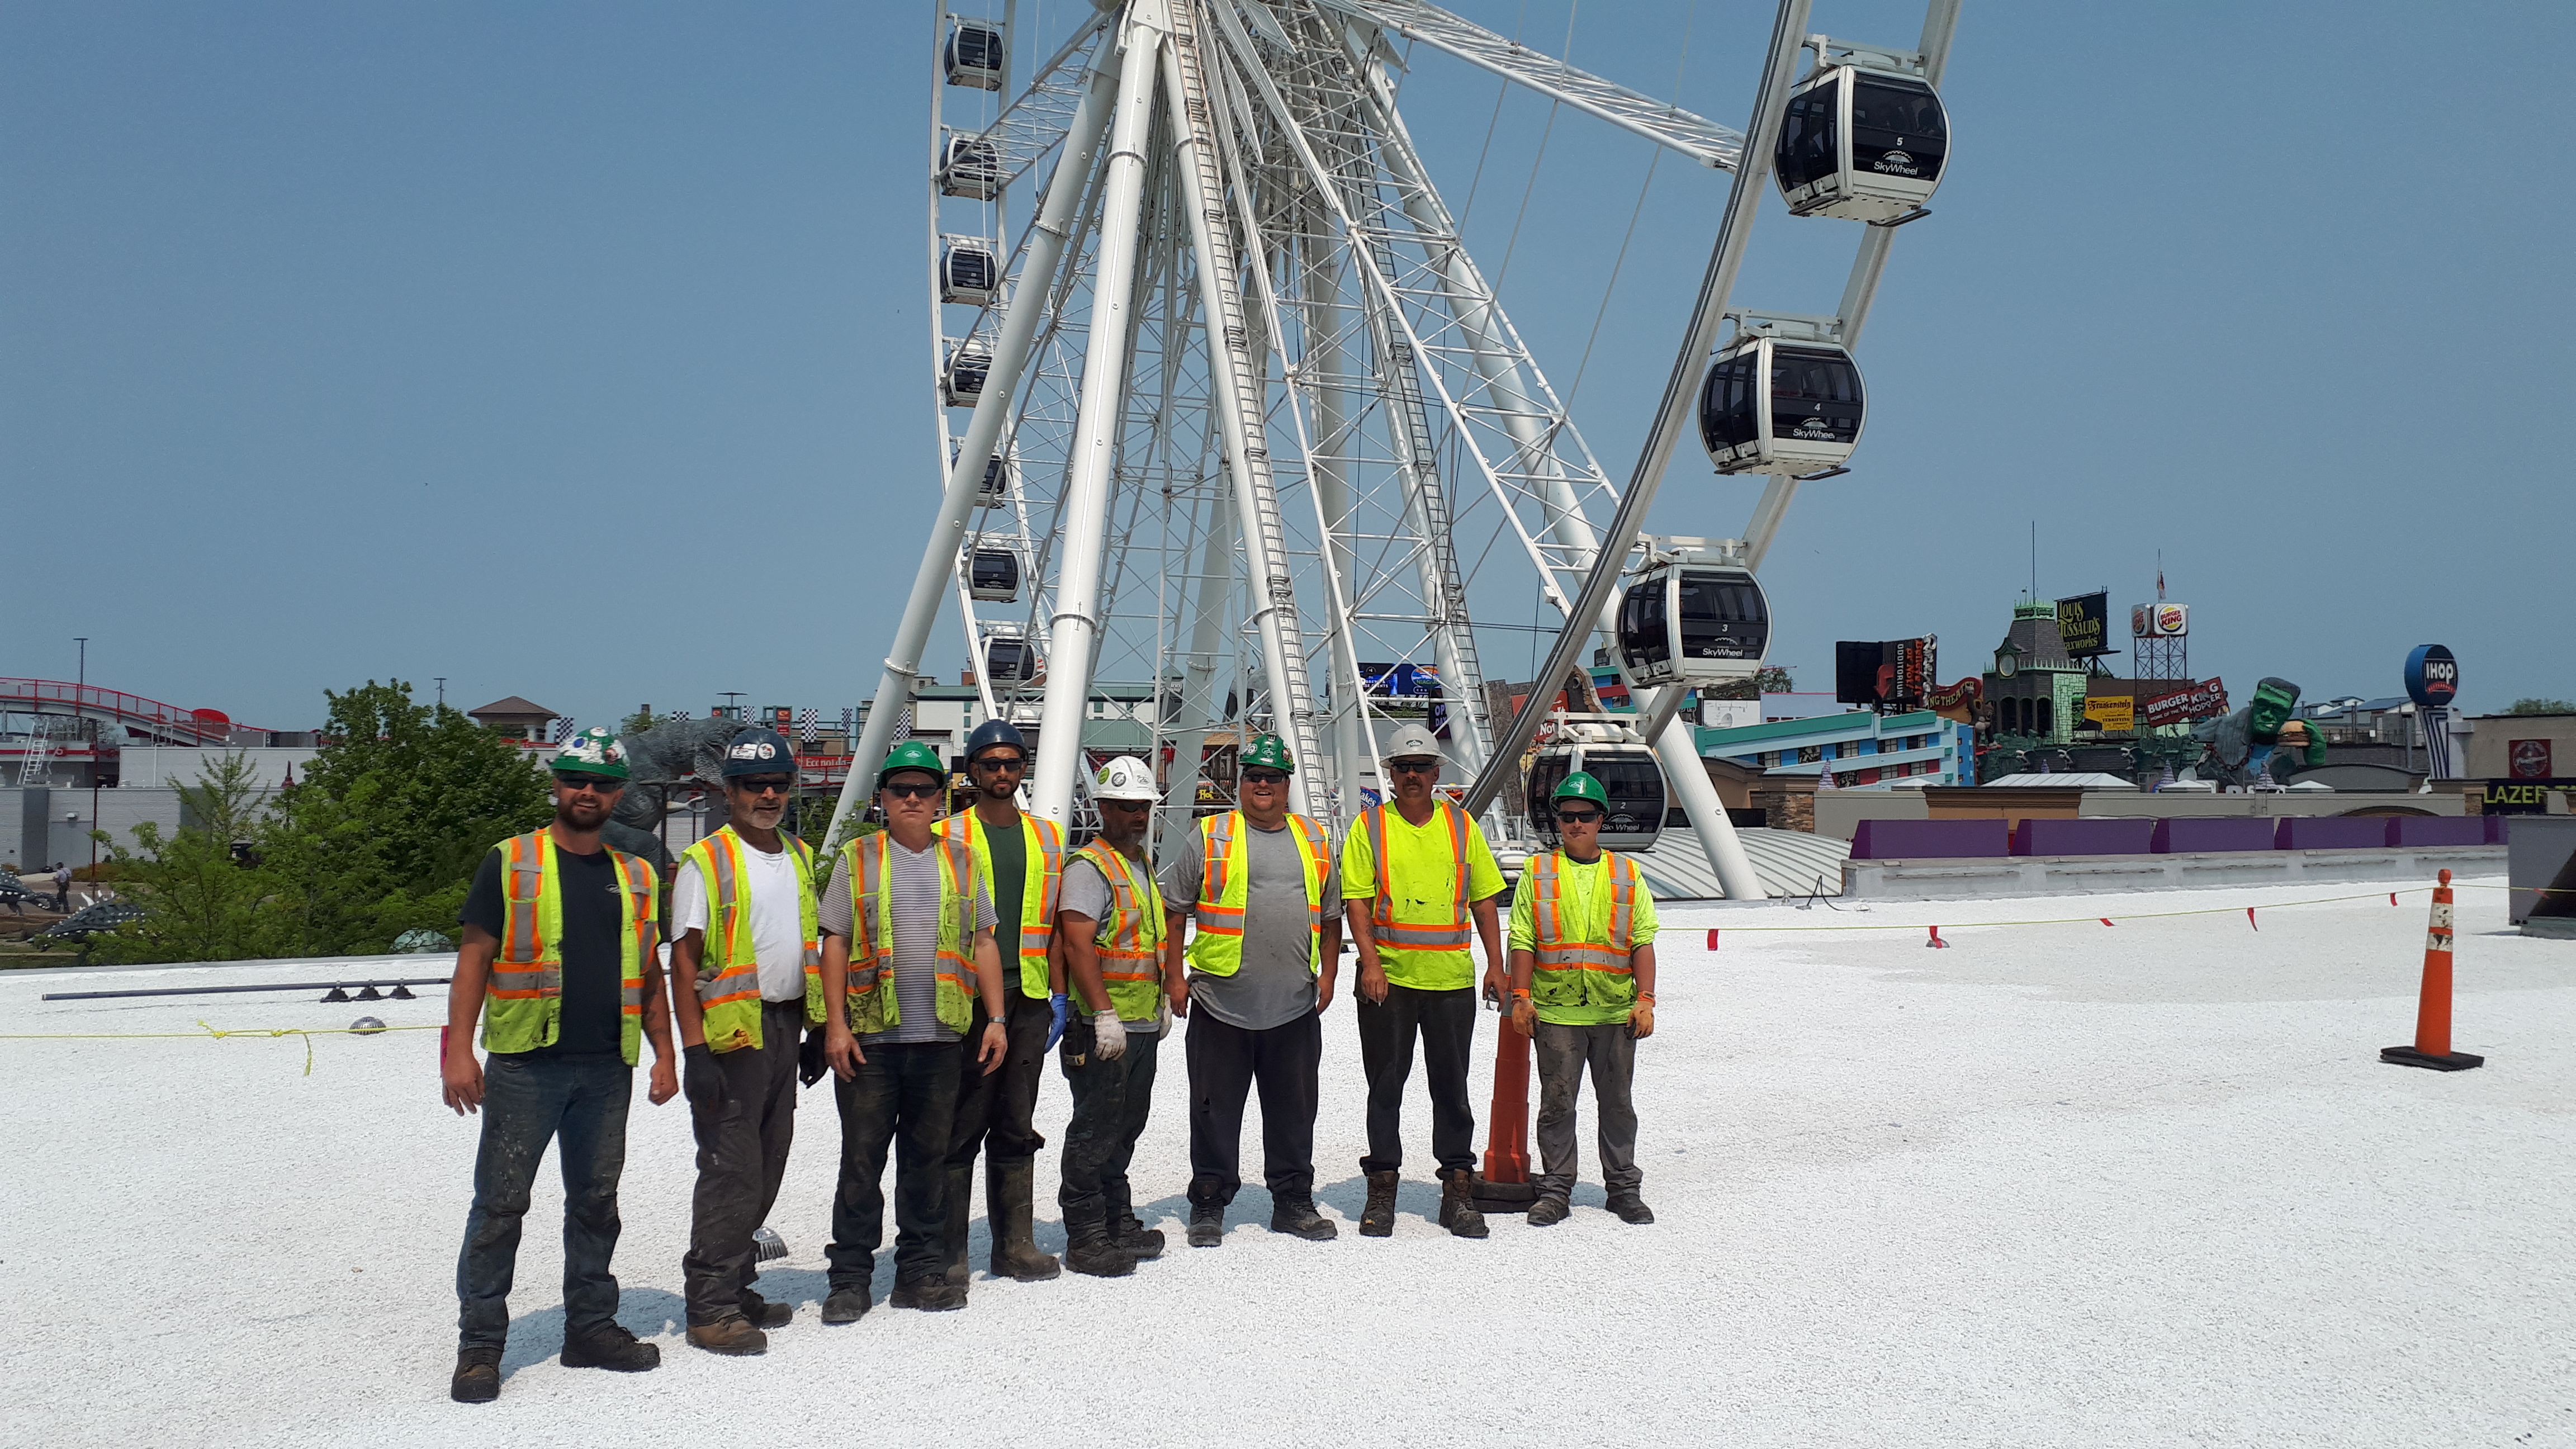 Construction workers in front of Ferris Wheel